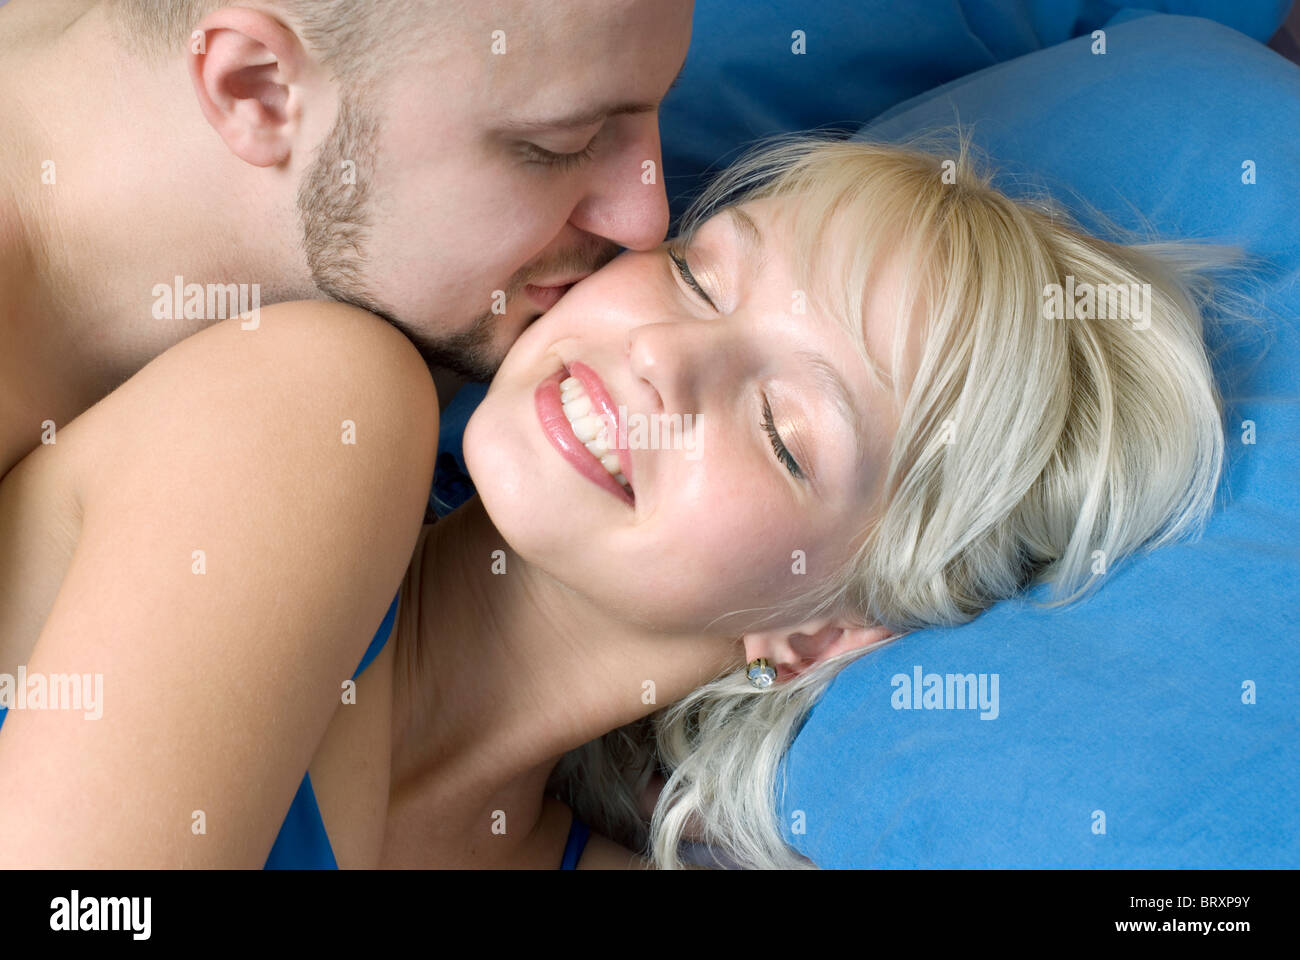 Close-up of young man kissing woman in bed Stock Photo